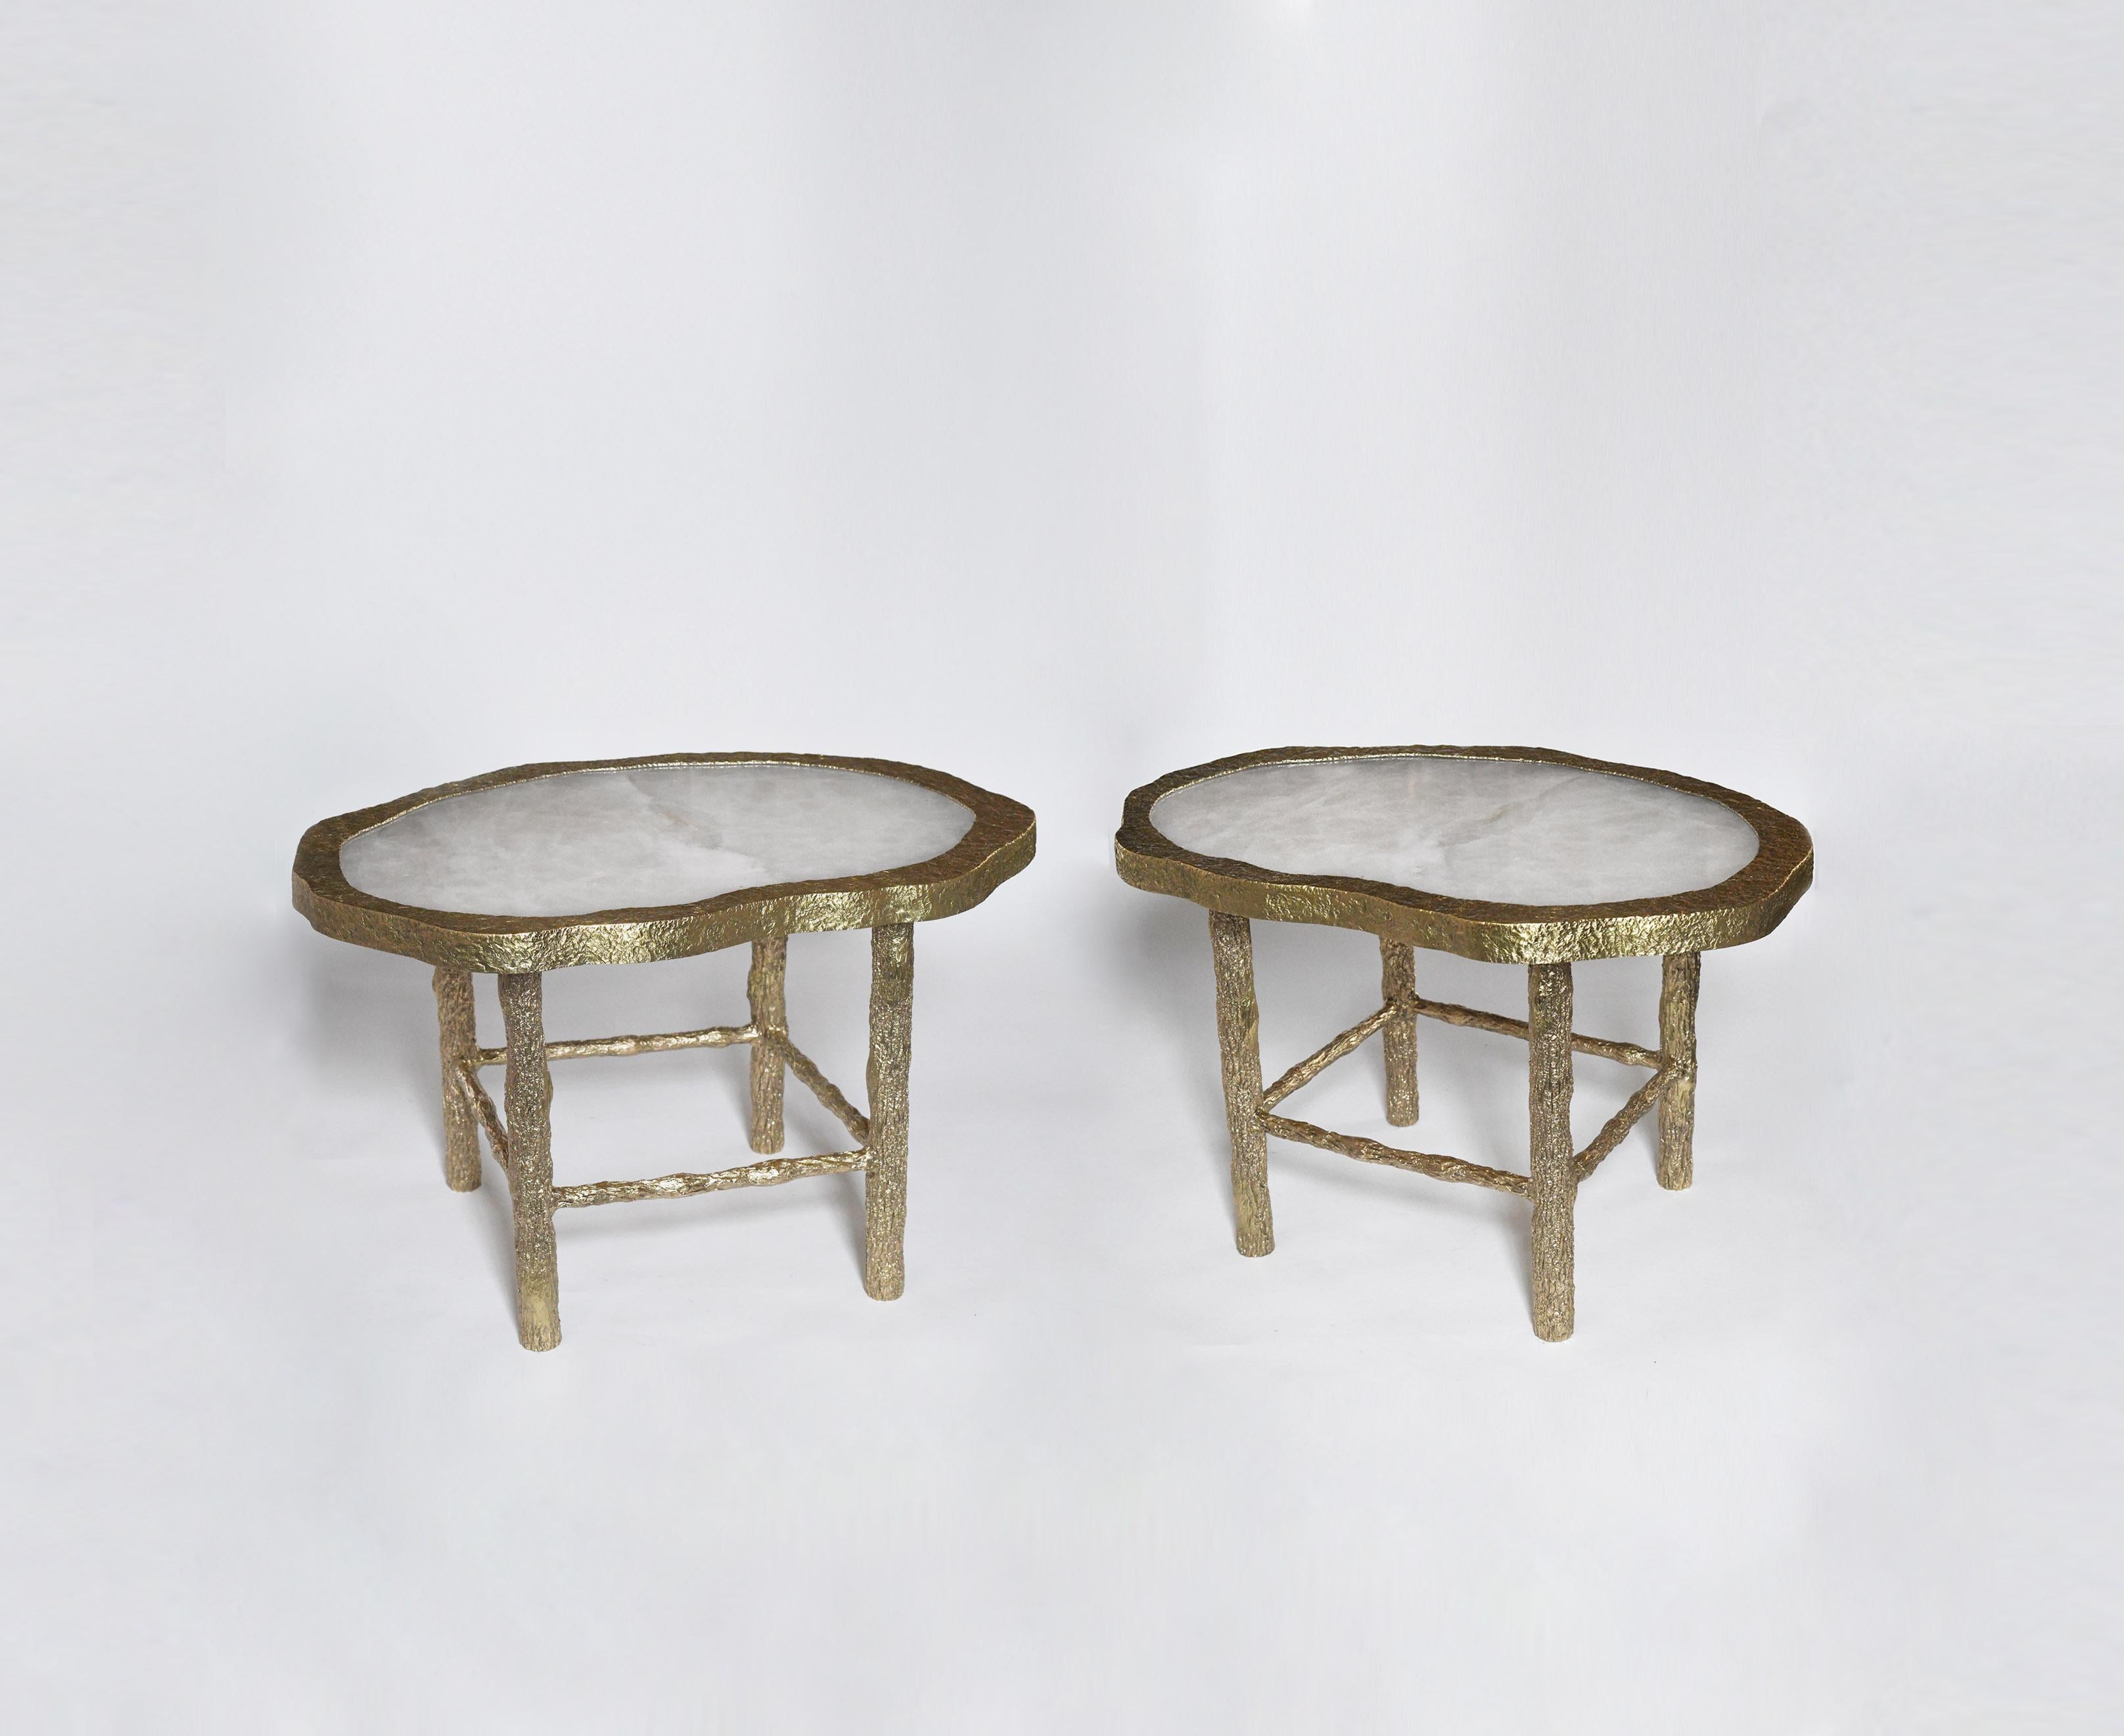 Pair of rock crystal quartz cocktail tables with twig inspired hammered brass legs, created by Phoenix Gallery.
Custom size upon request.
Can be sold by separate.